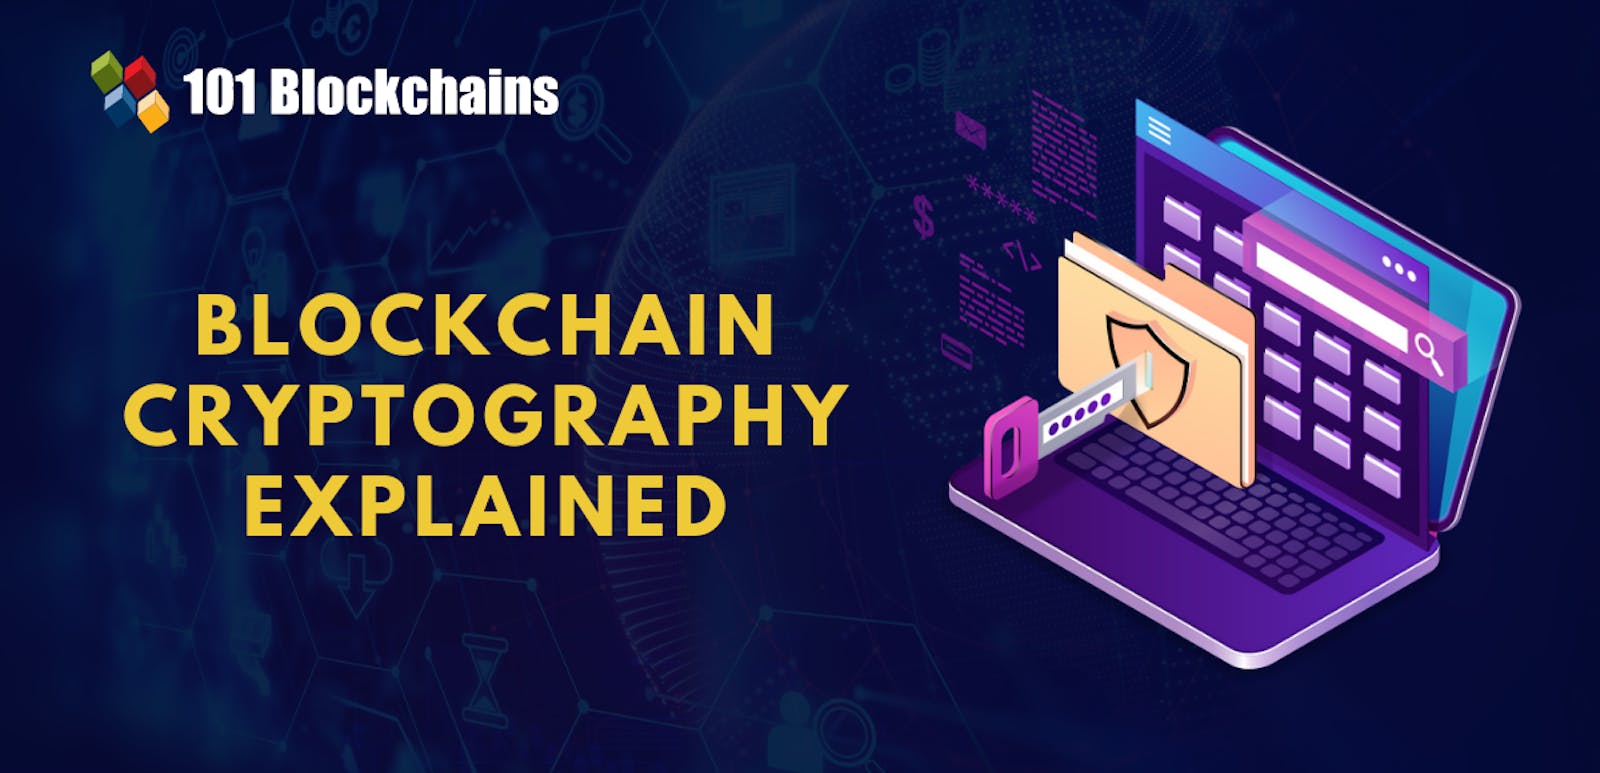 Cryptography and roles into Blockchain Development ⛓️